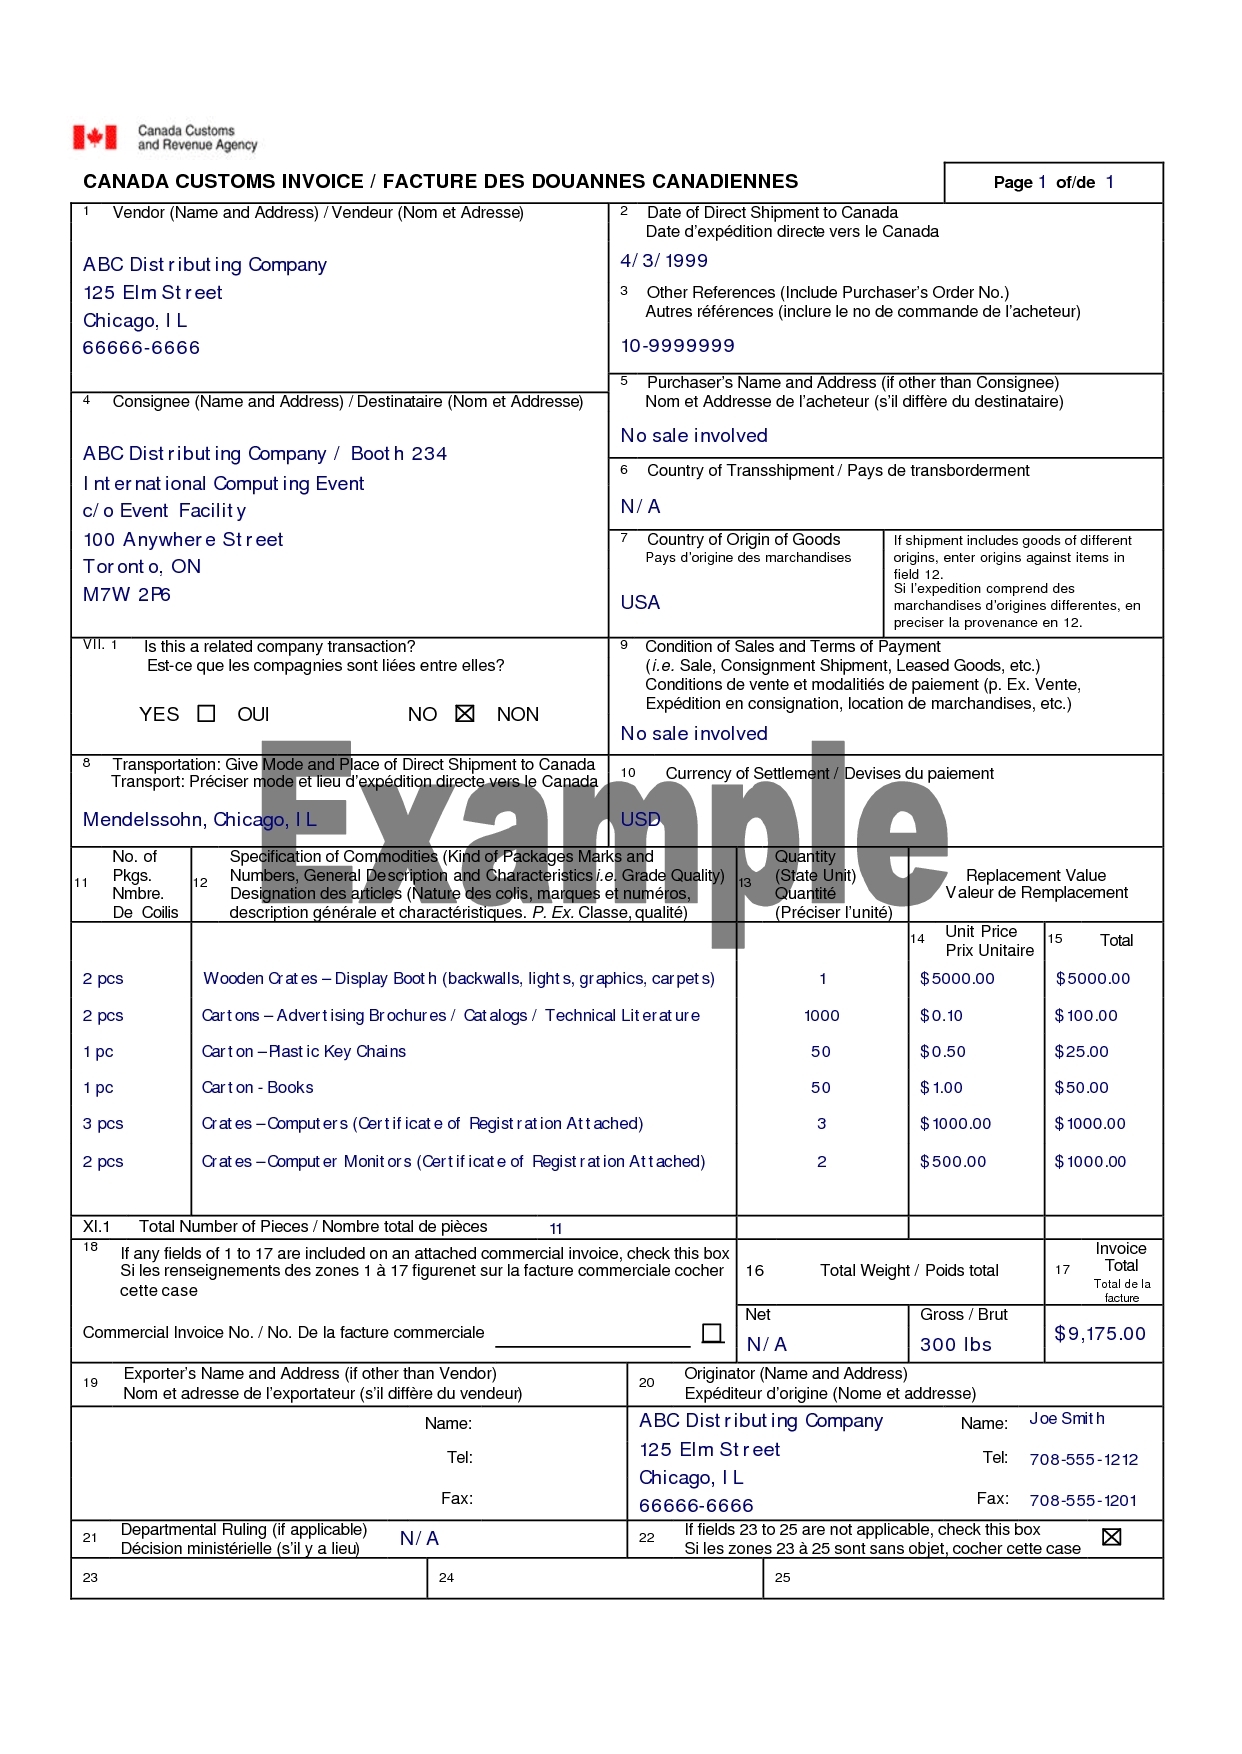 canada customs invoice template vrices document canada customs invoice instructions